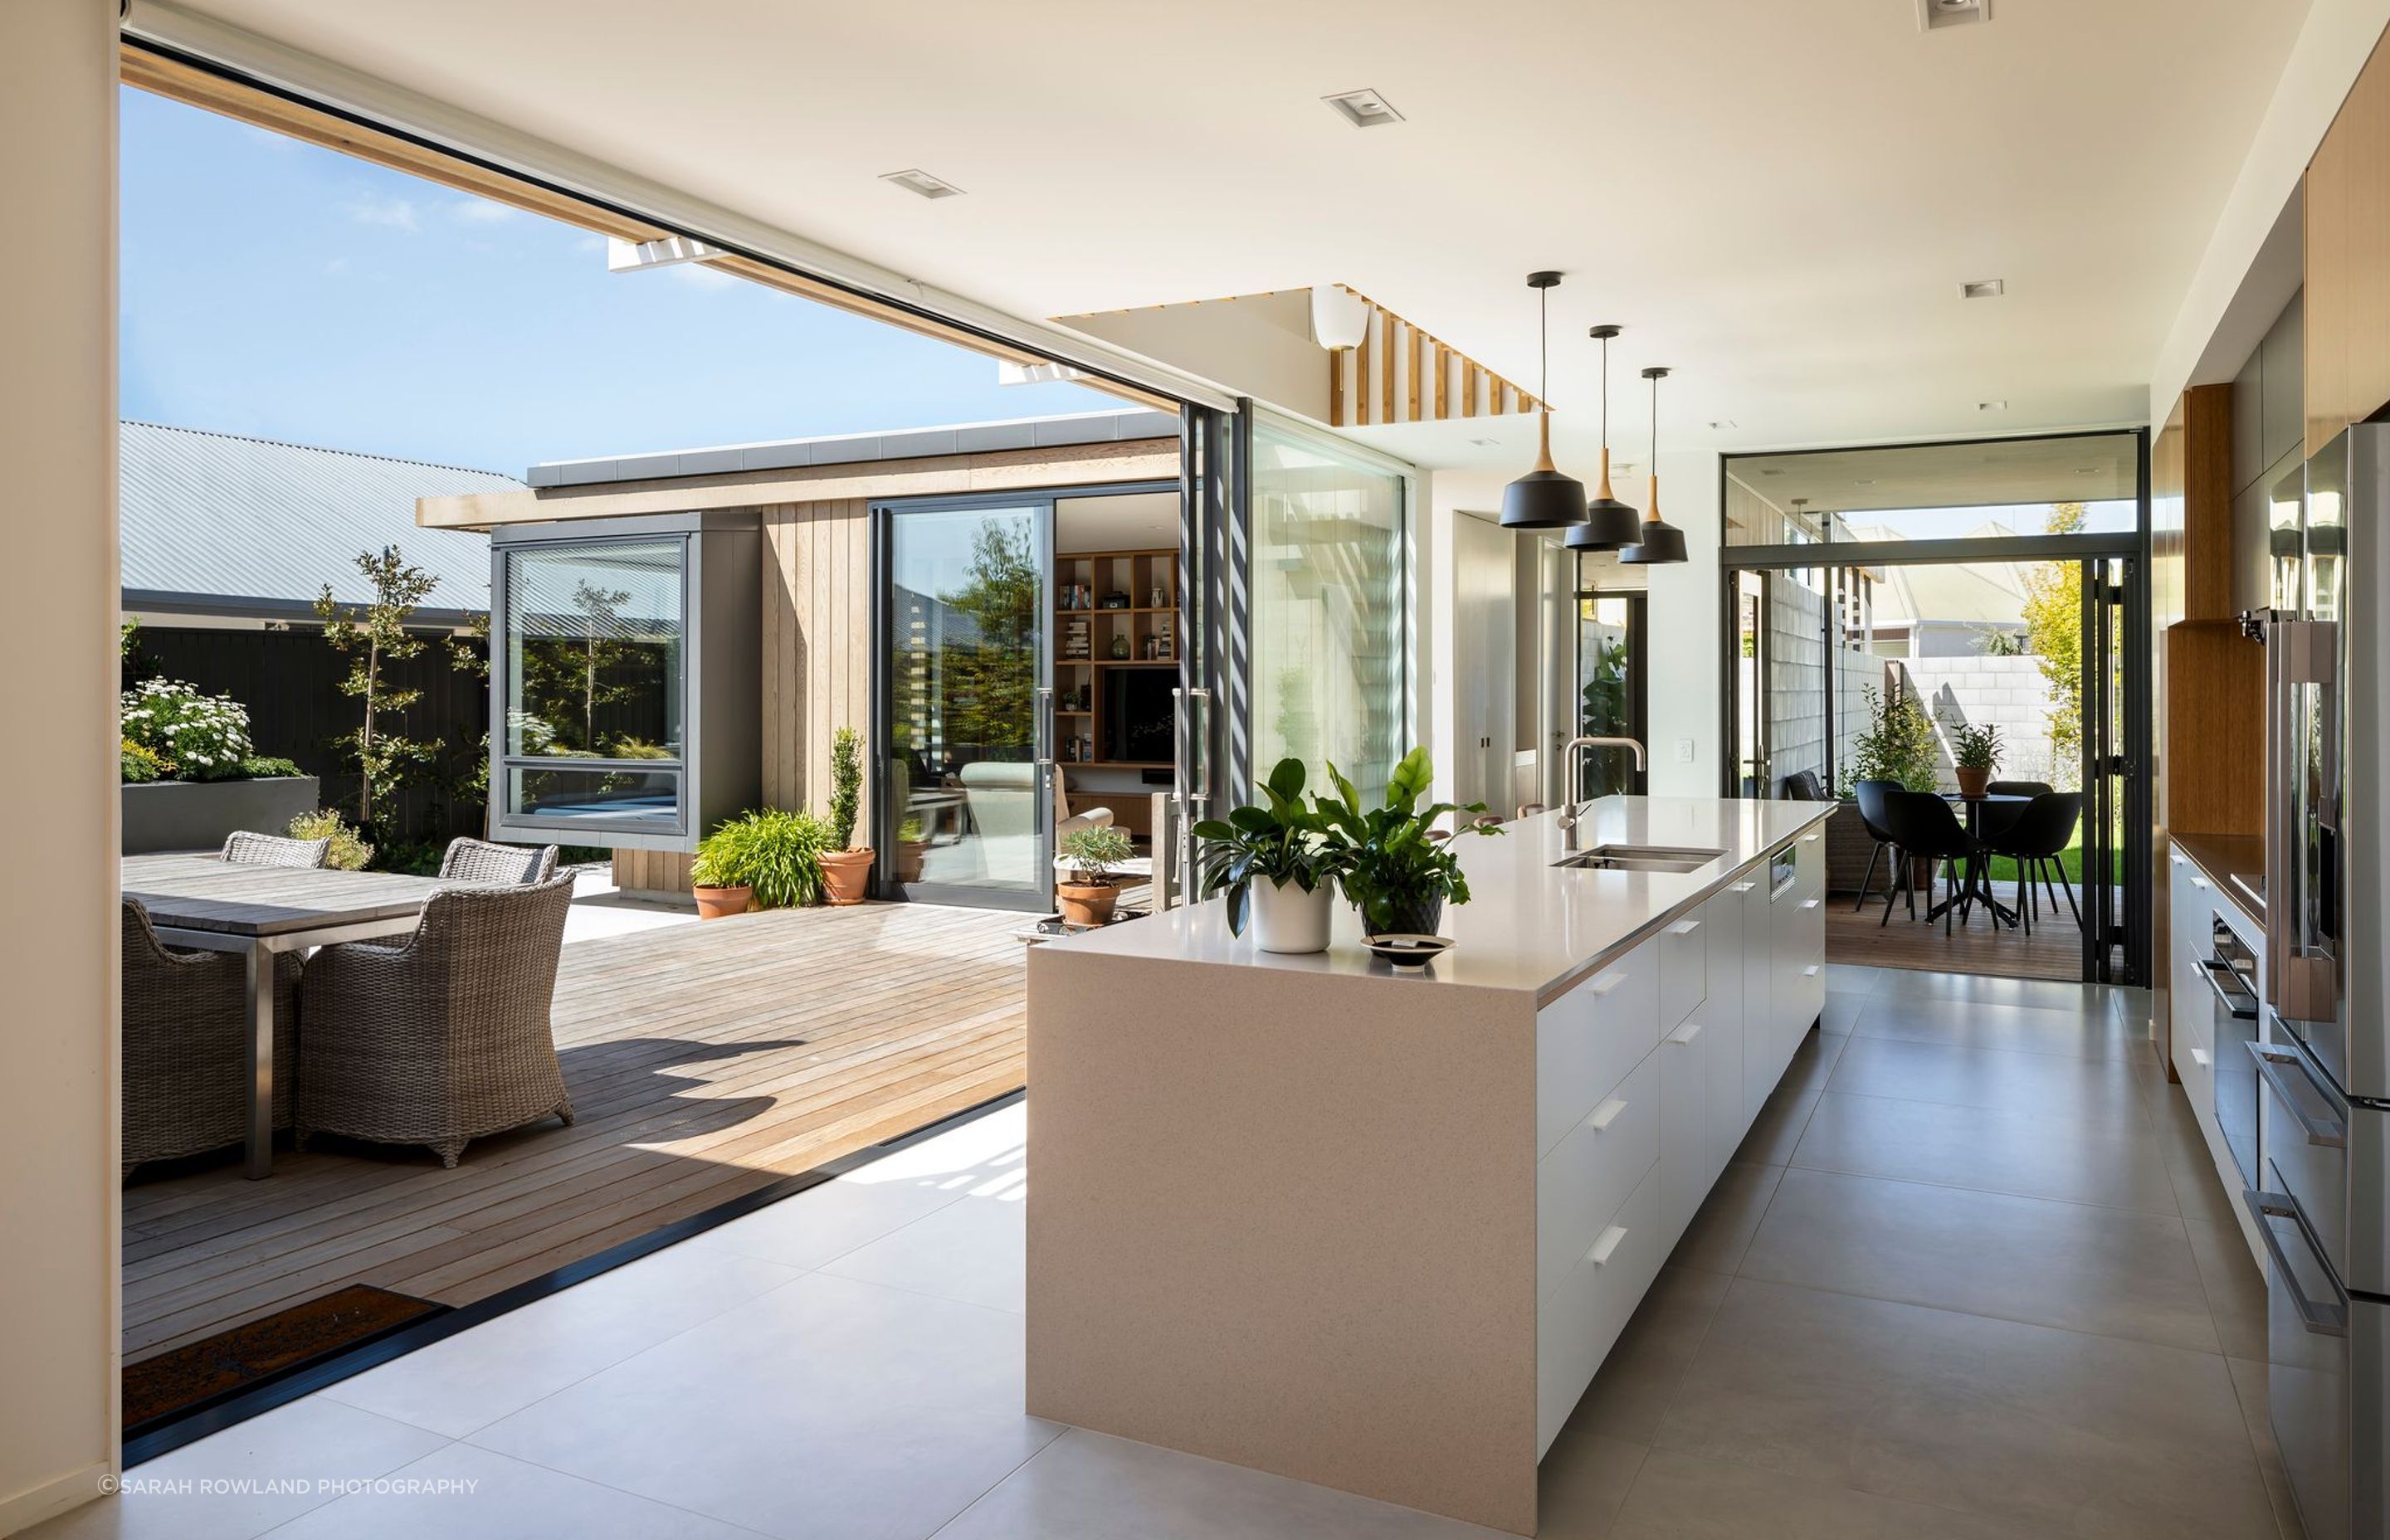 The kitchen is the heart of the home and the pivot point for the three courtyards.